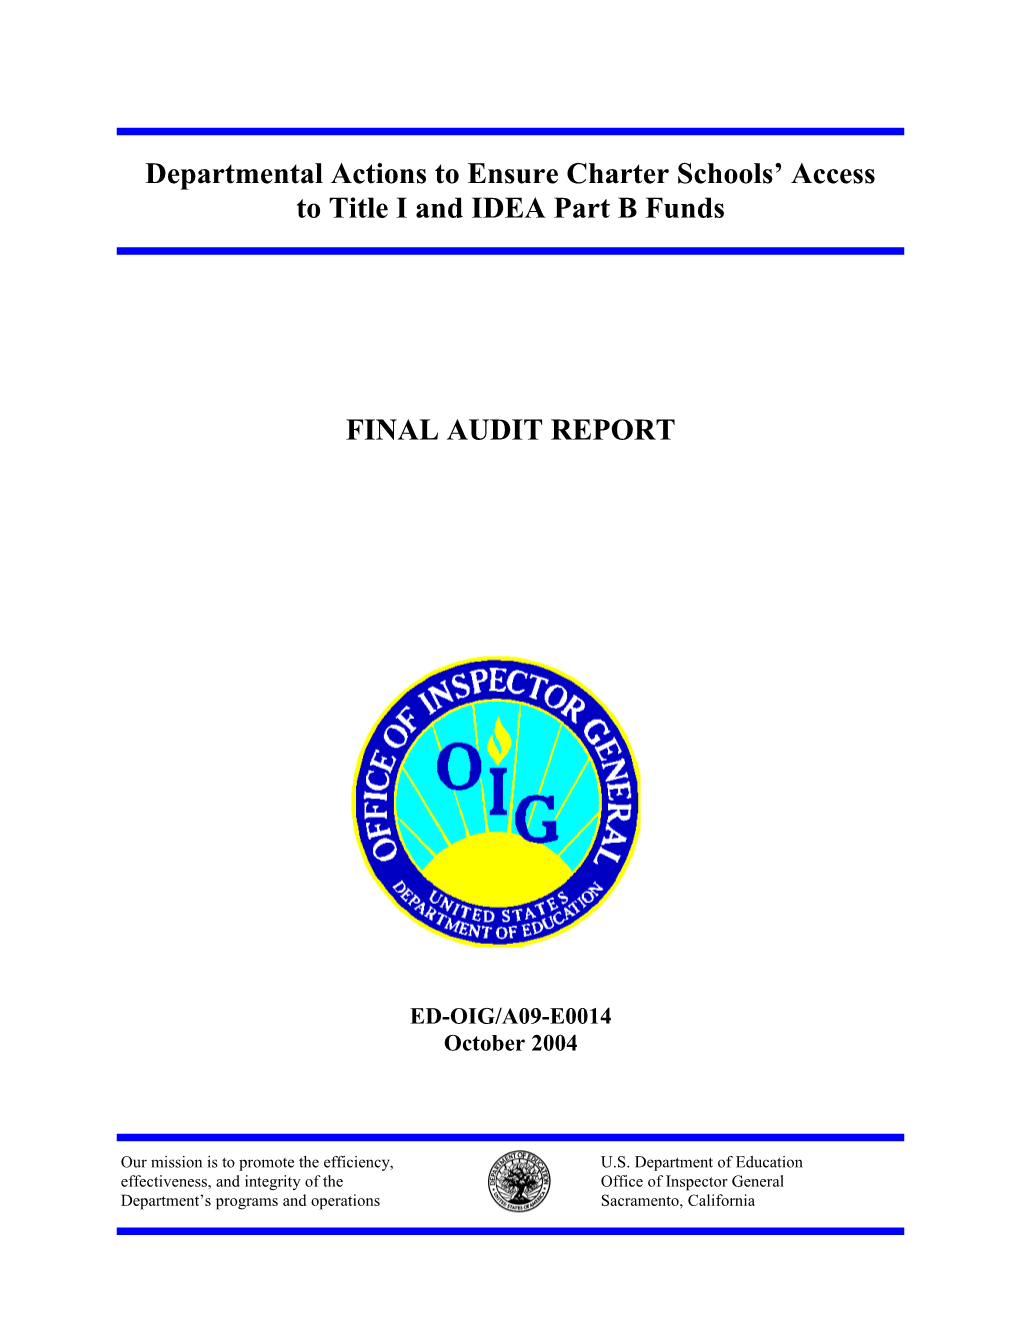 Department Actions to Ensure Charter Schools' Access to Title I and IDEA, Part B Funds (MS Word)